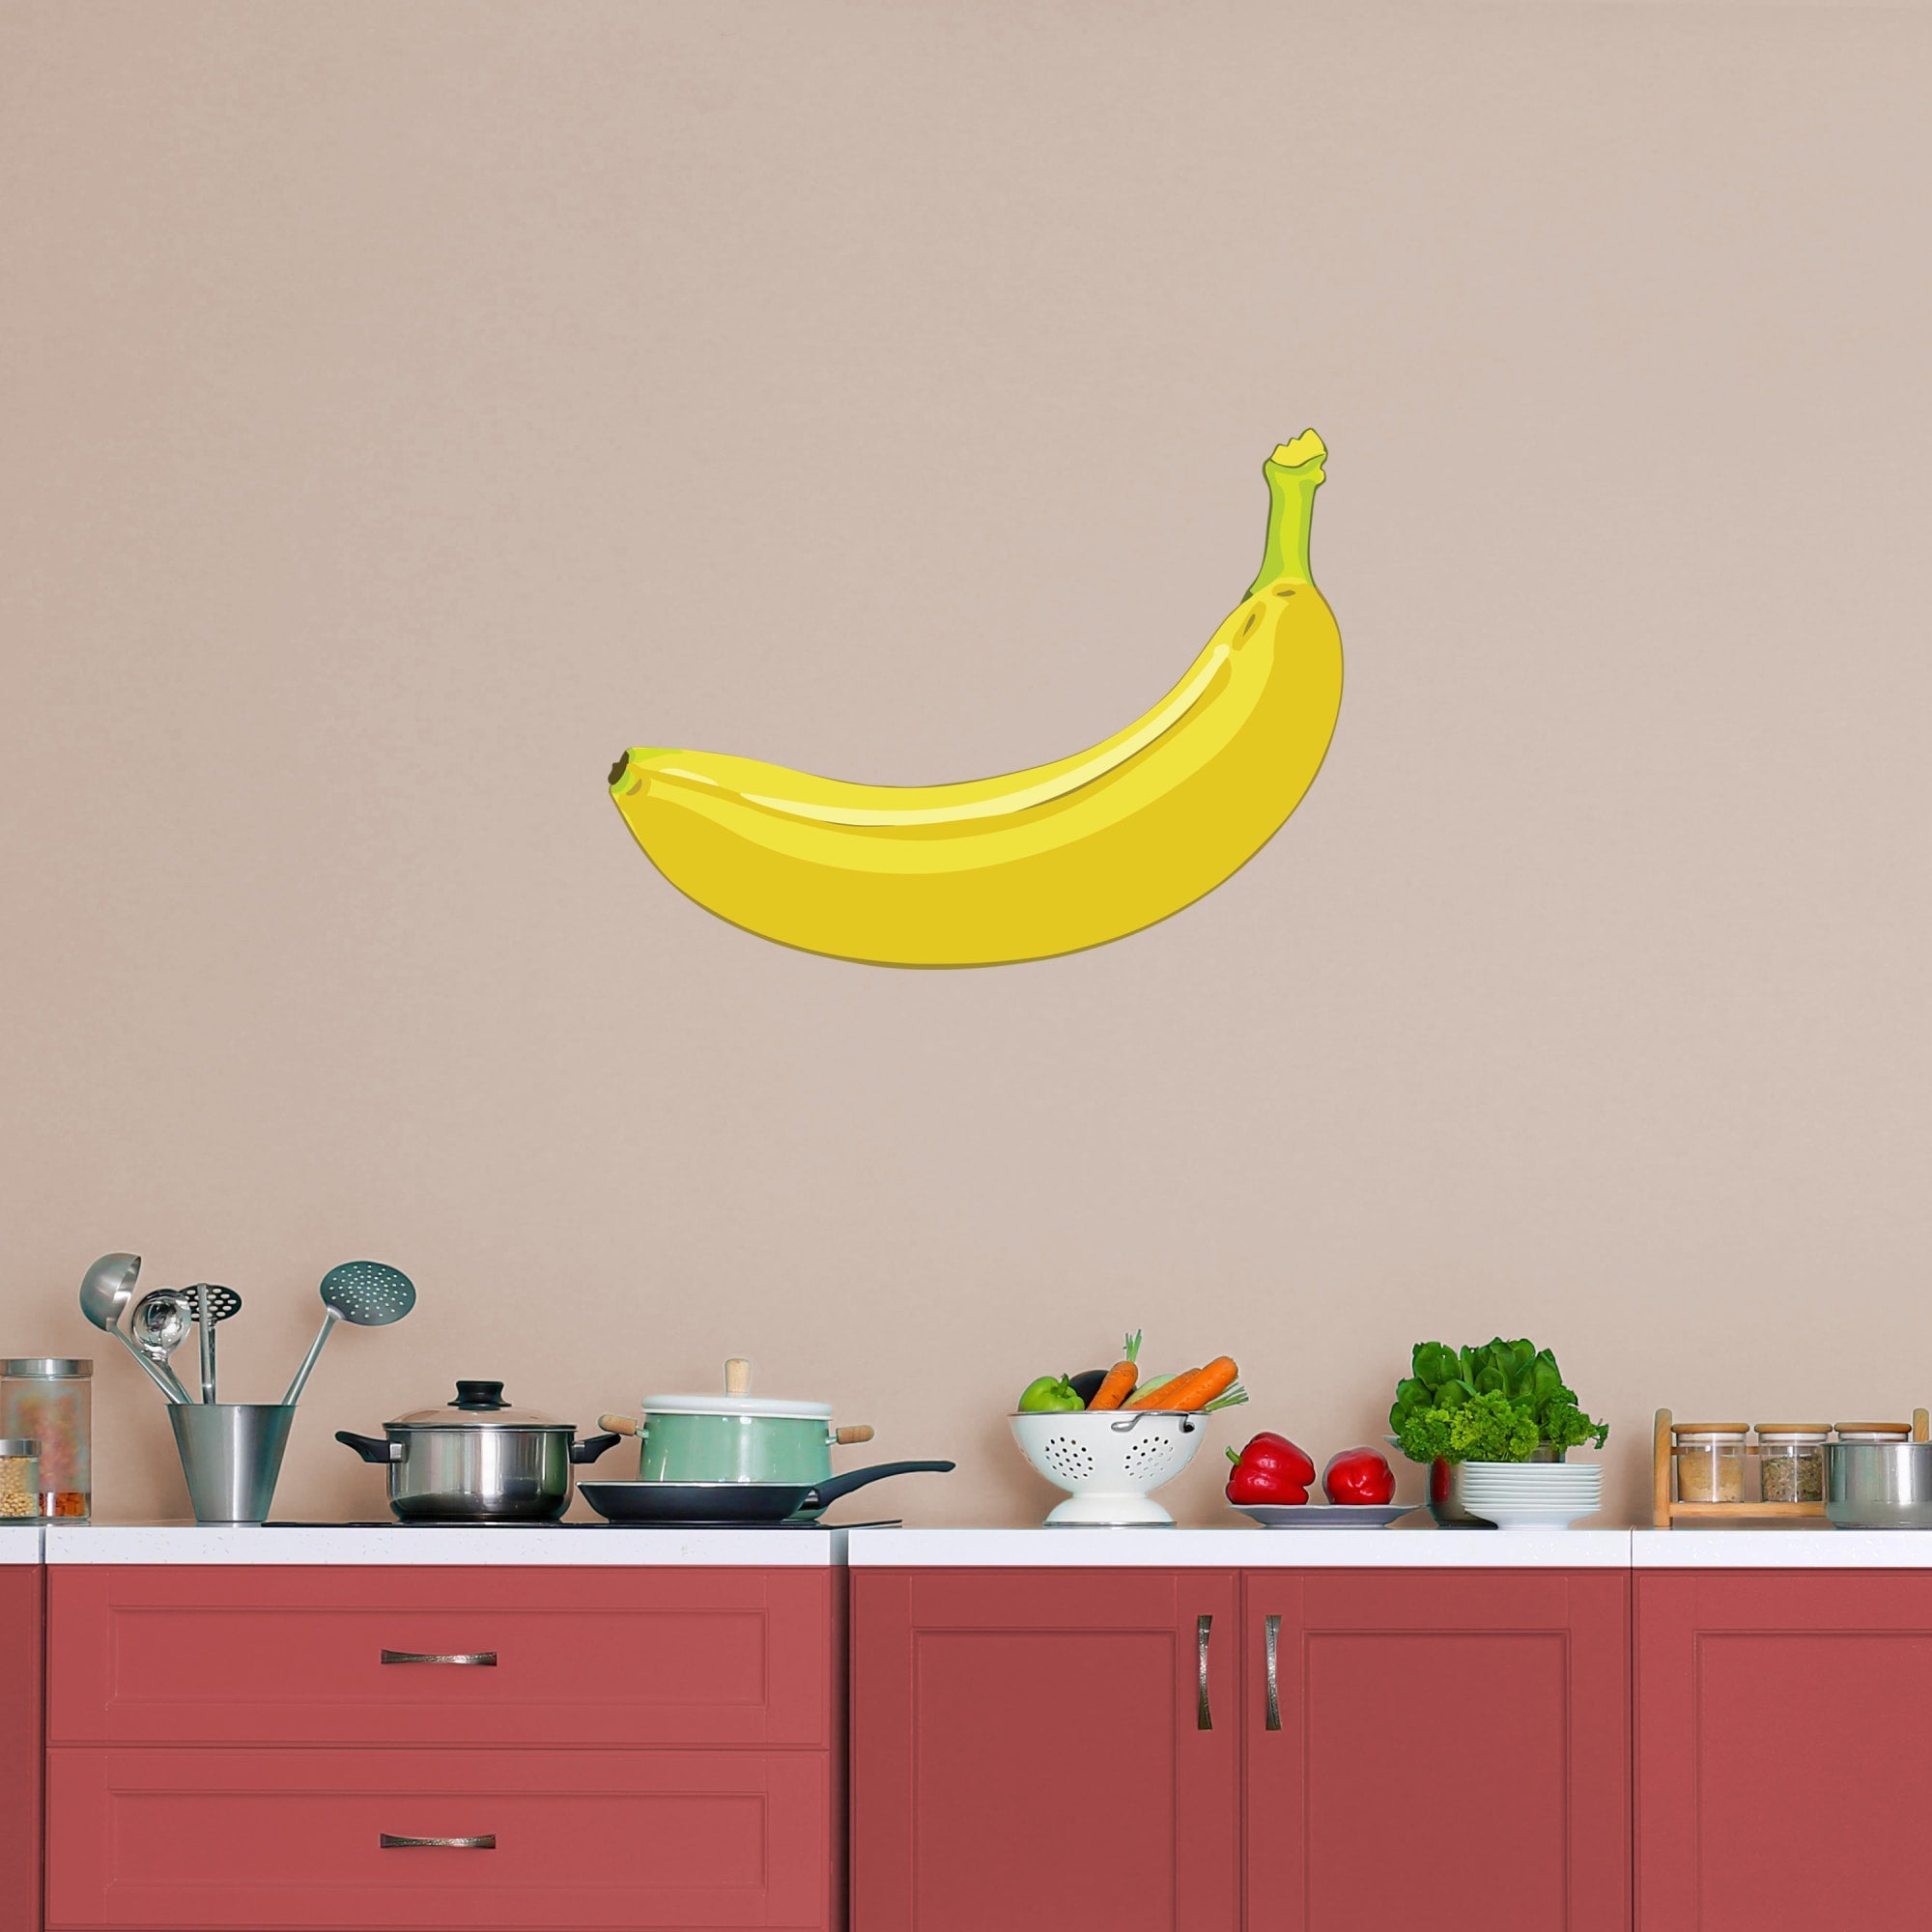 Banana: Illustrated - Removable Vinyl Decal XL by Fathead